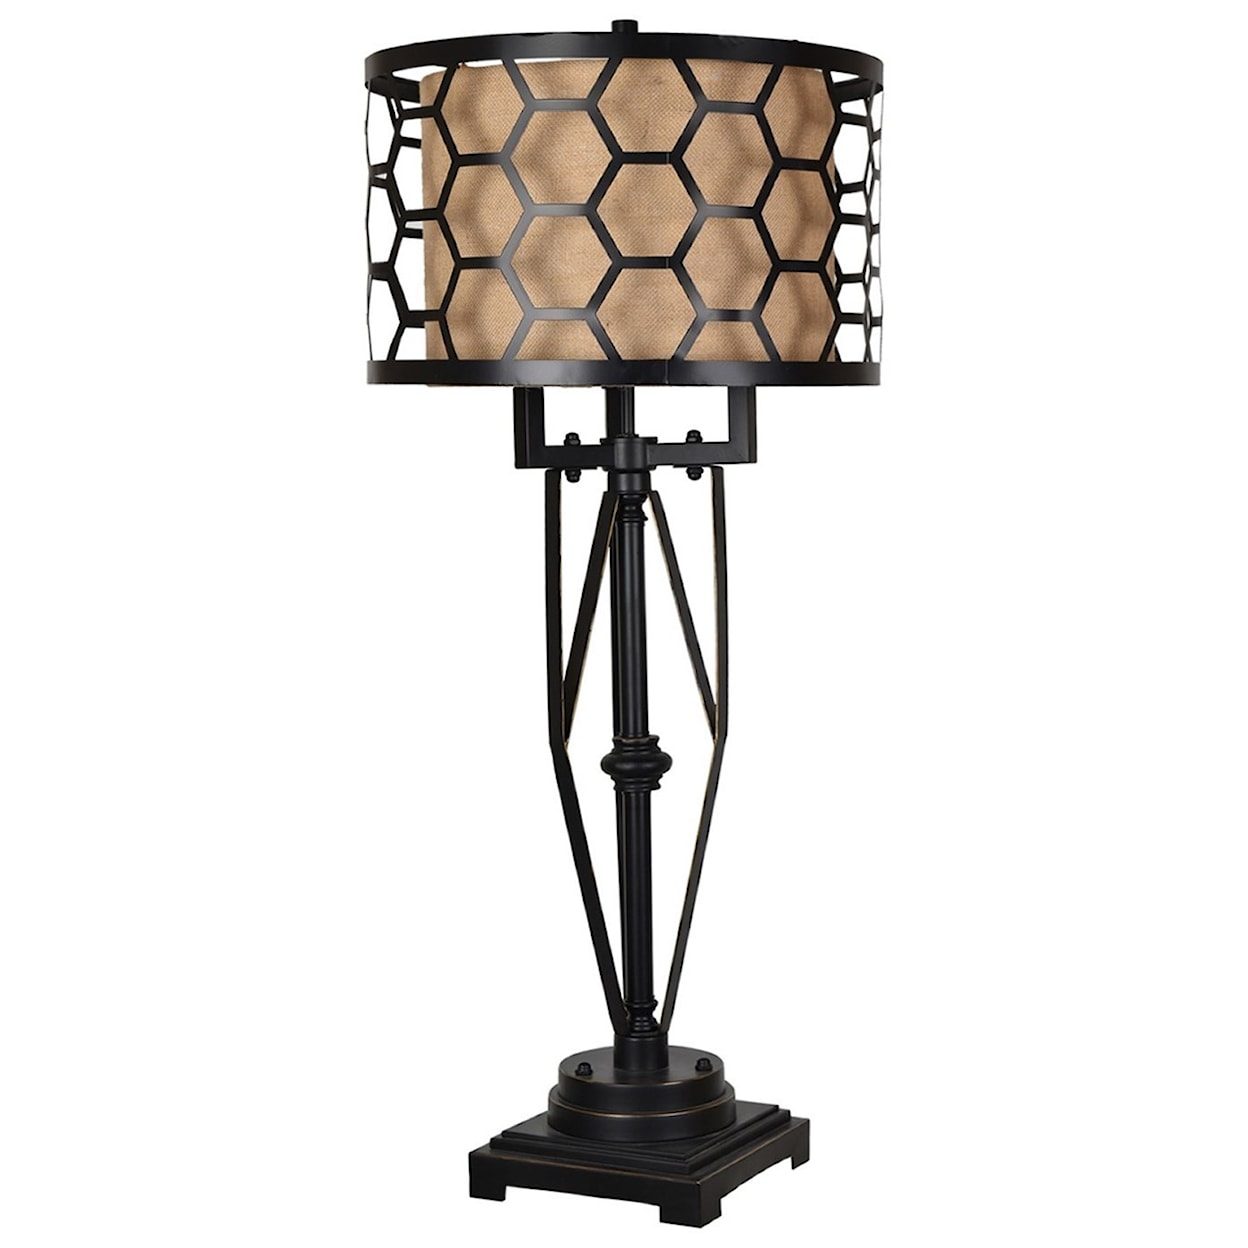 Crestview Collection Lighting Flynn Table Lamp